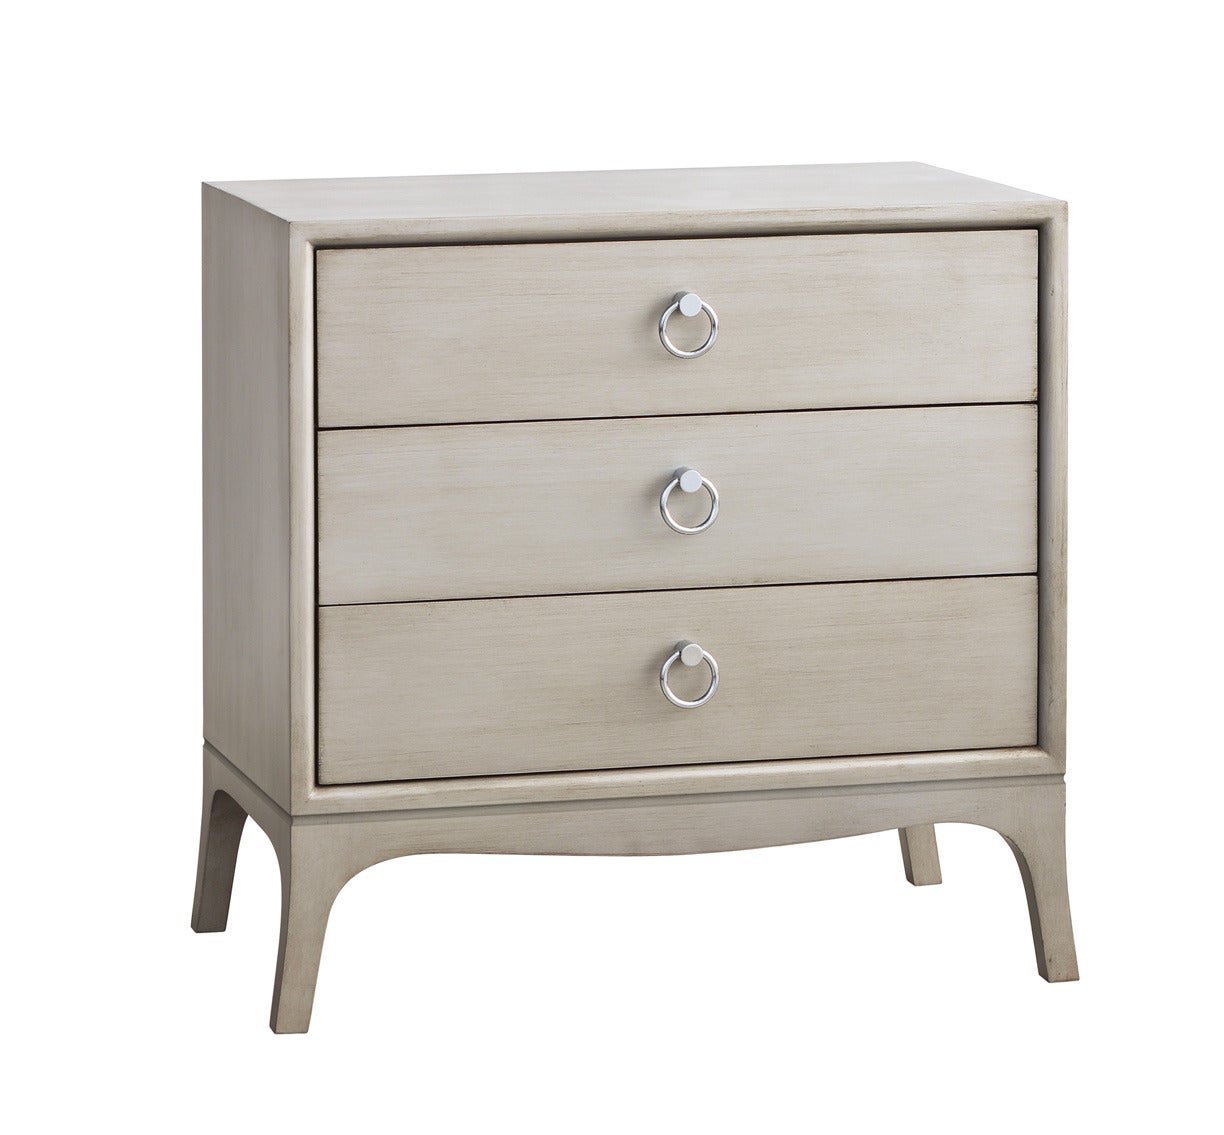 Three Drawer Nightstand For Sale